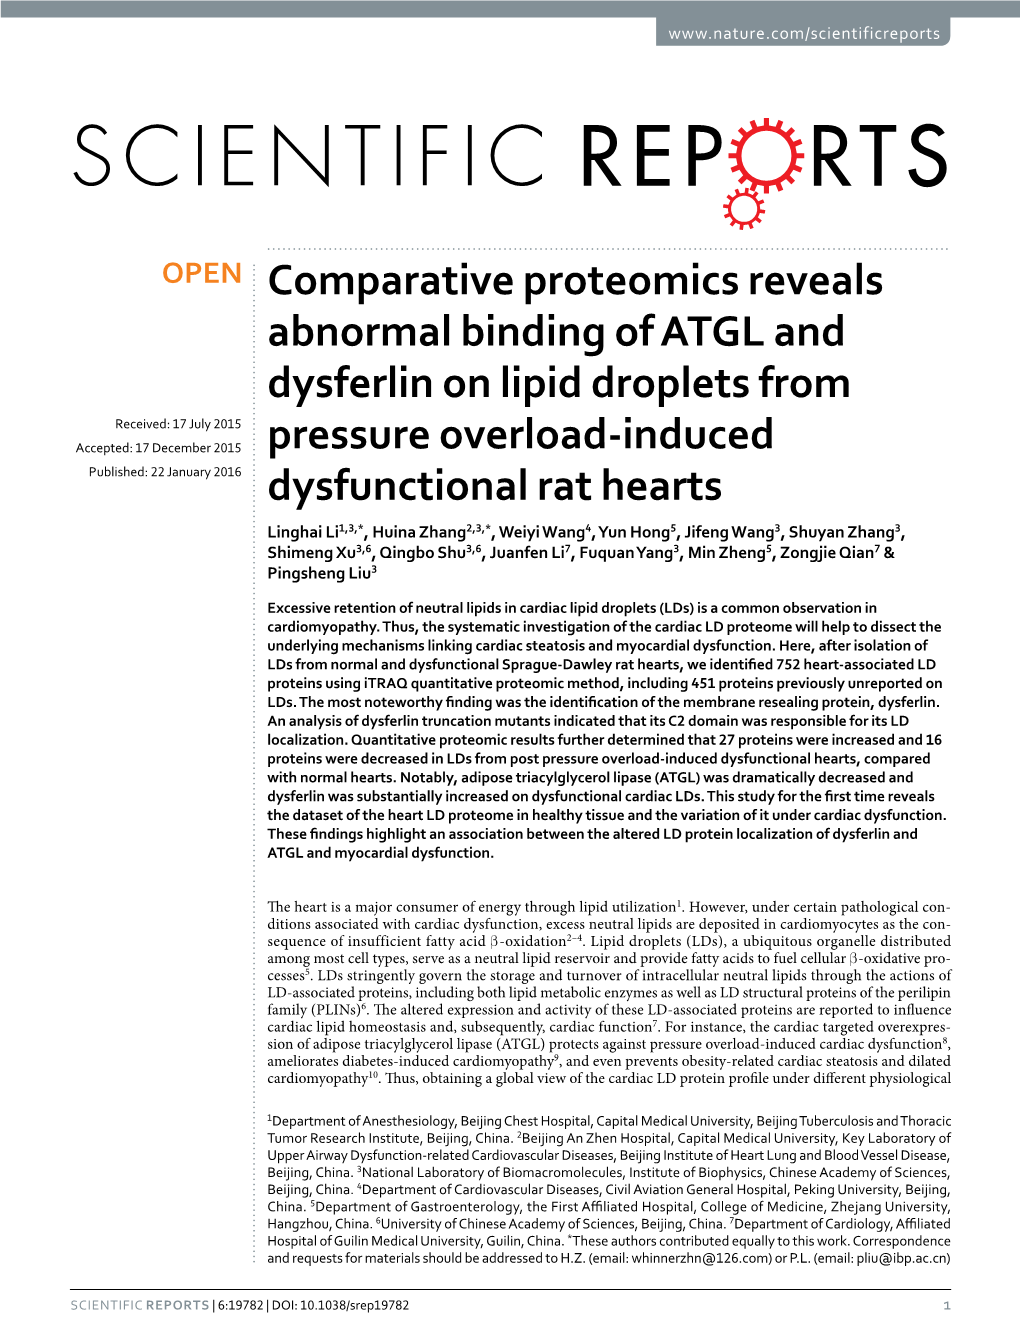 Comparative Proteomics Reveals Abnormal Binding of ATGL and Dysferlin on Lipid Droplets from Pressure Overload-Induced Dysfunctional Rat Hearts